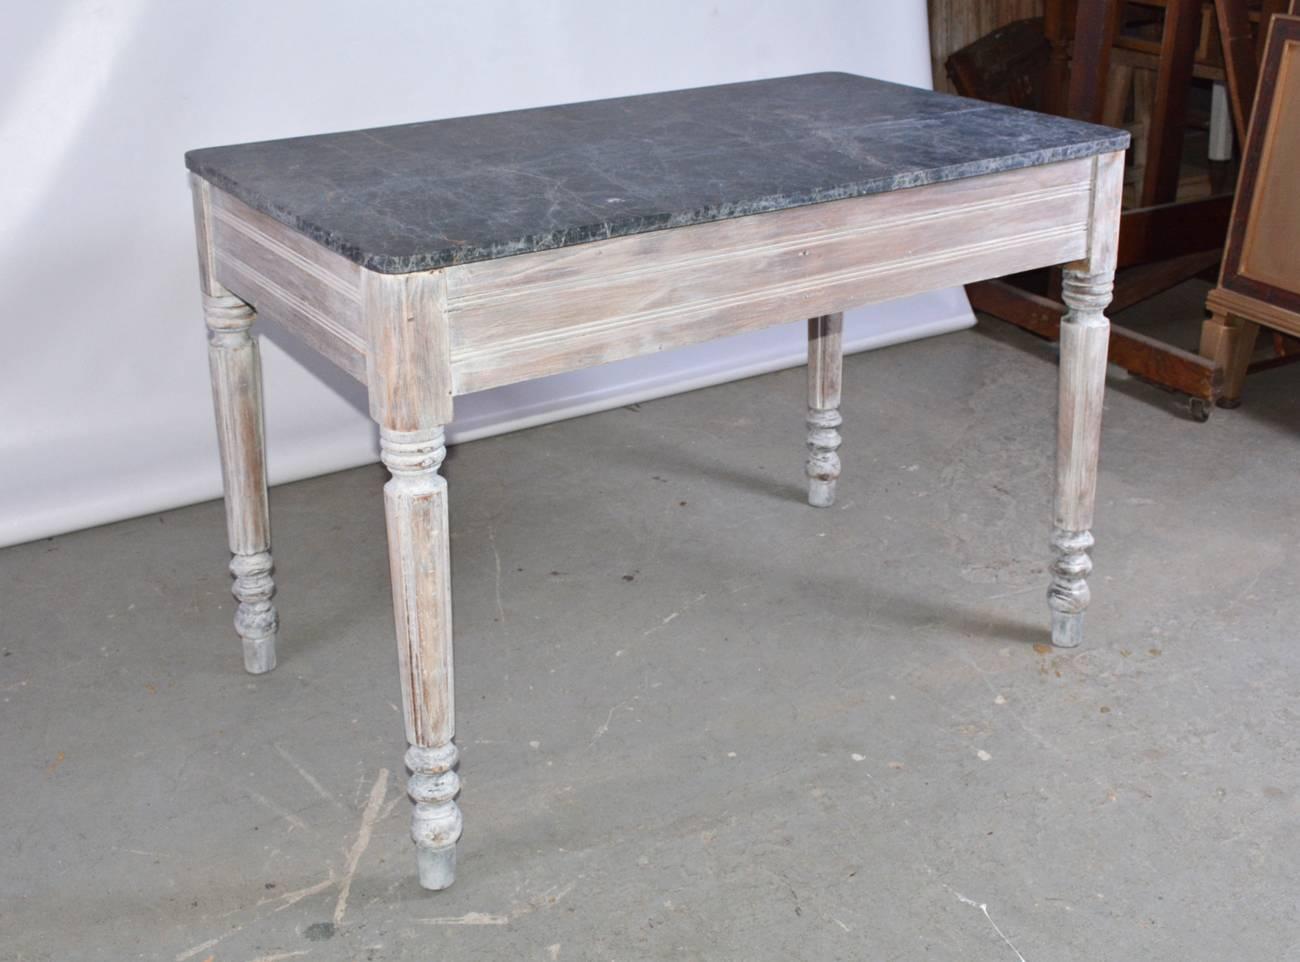 Hand-Painted Antique Country Desk with Marble Top